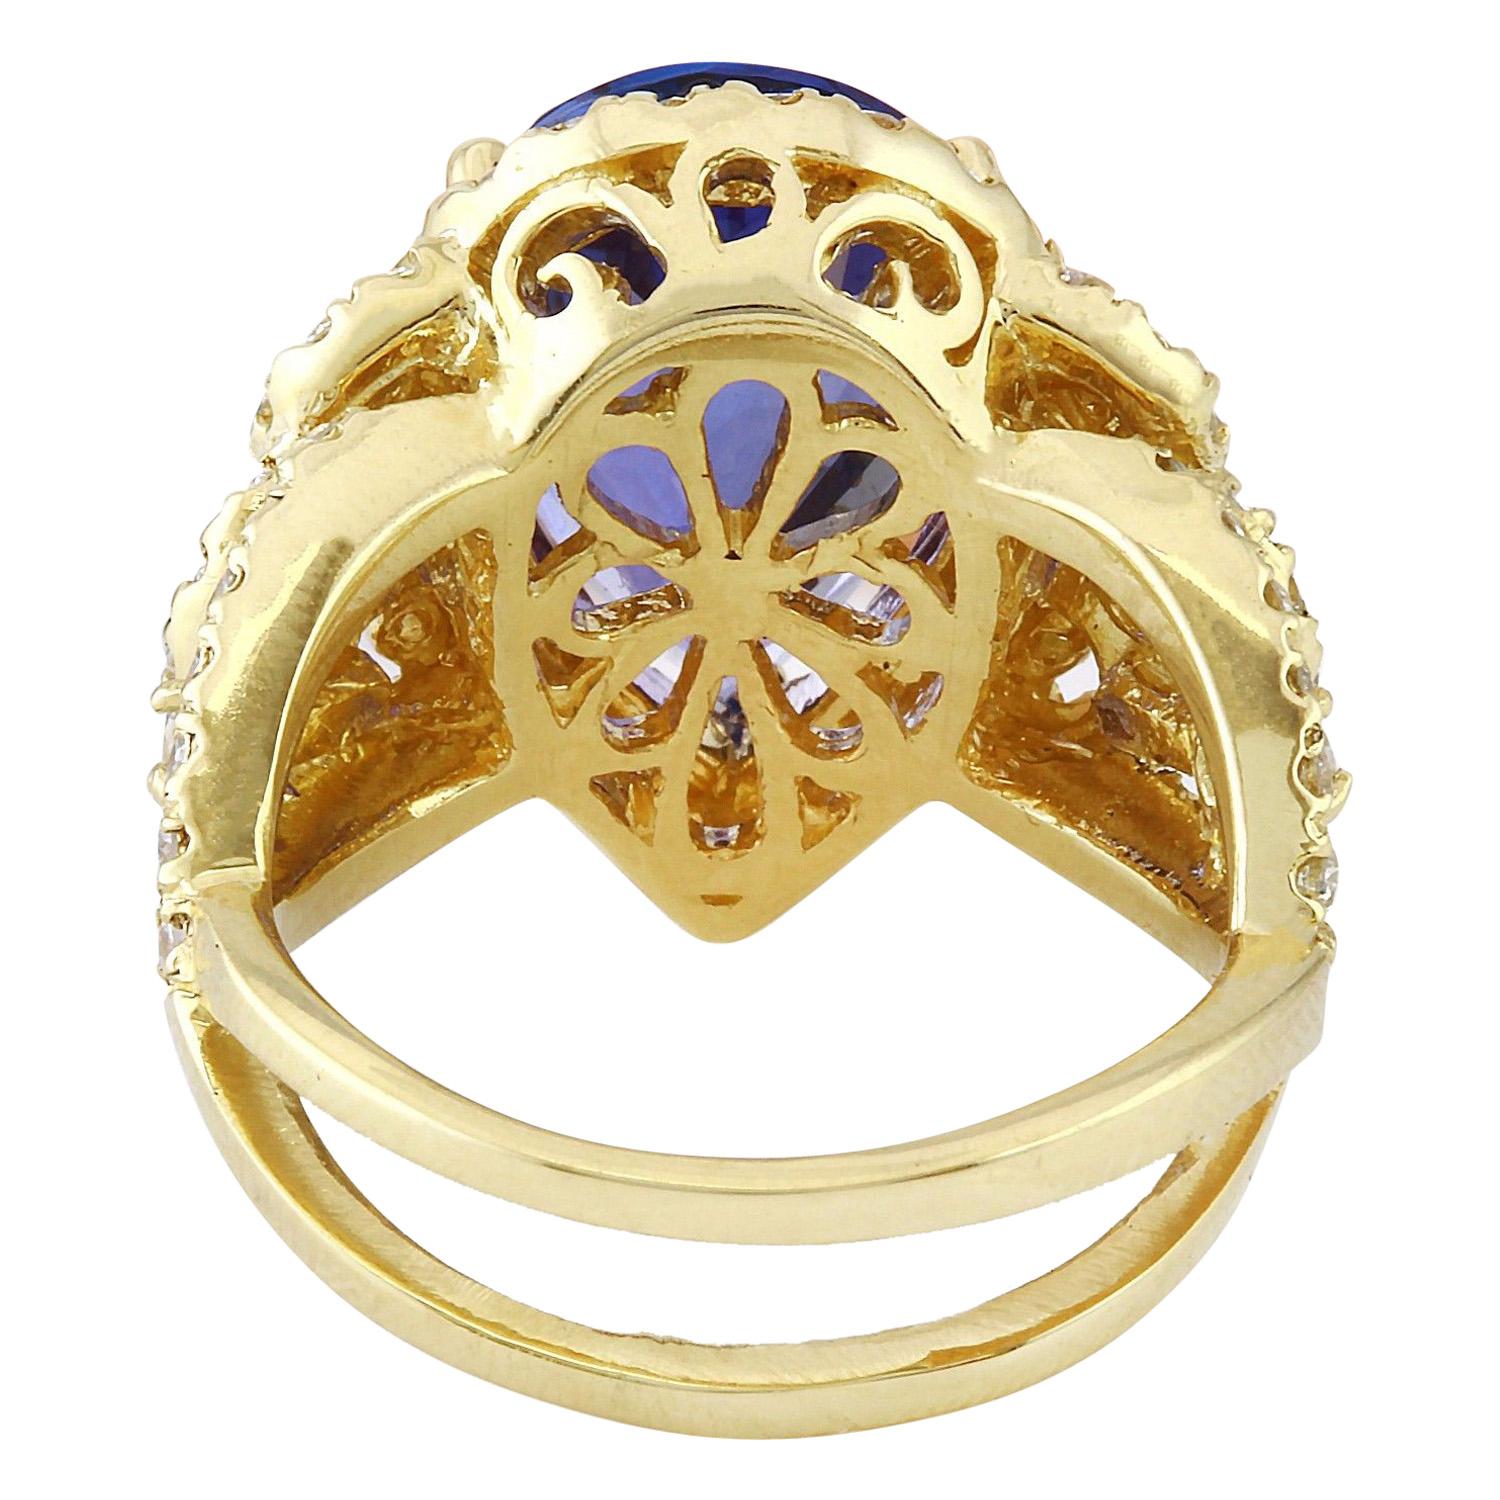 7.73 Carat Tanzanite 18 Karat Solid Yellow Gold Diamond Ring In New Condition For Sale In Los Angeles, CA